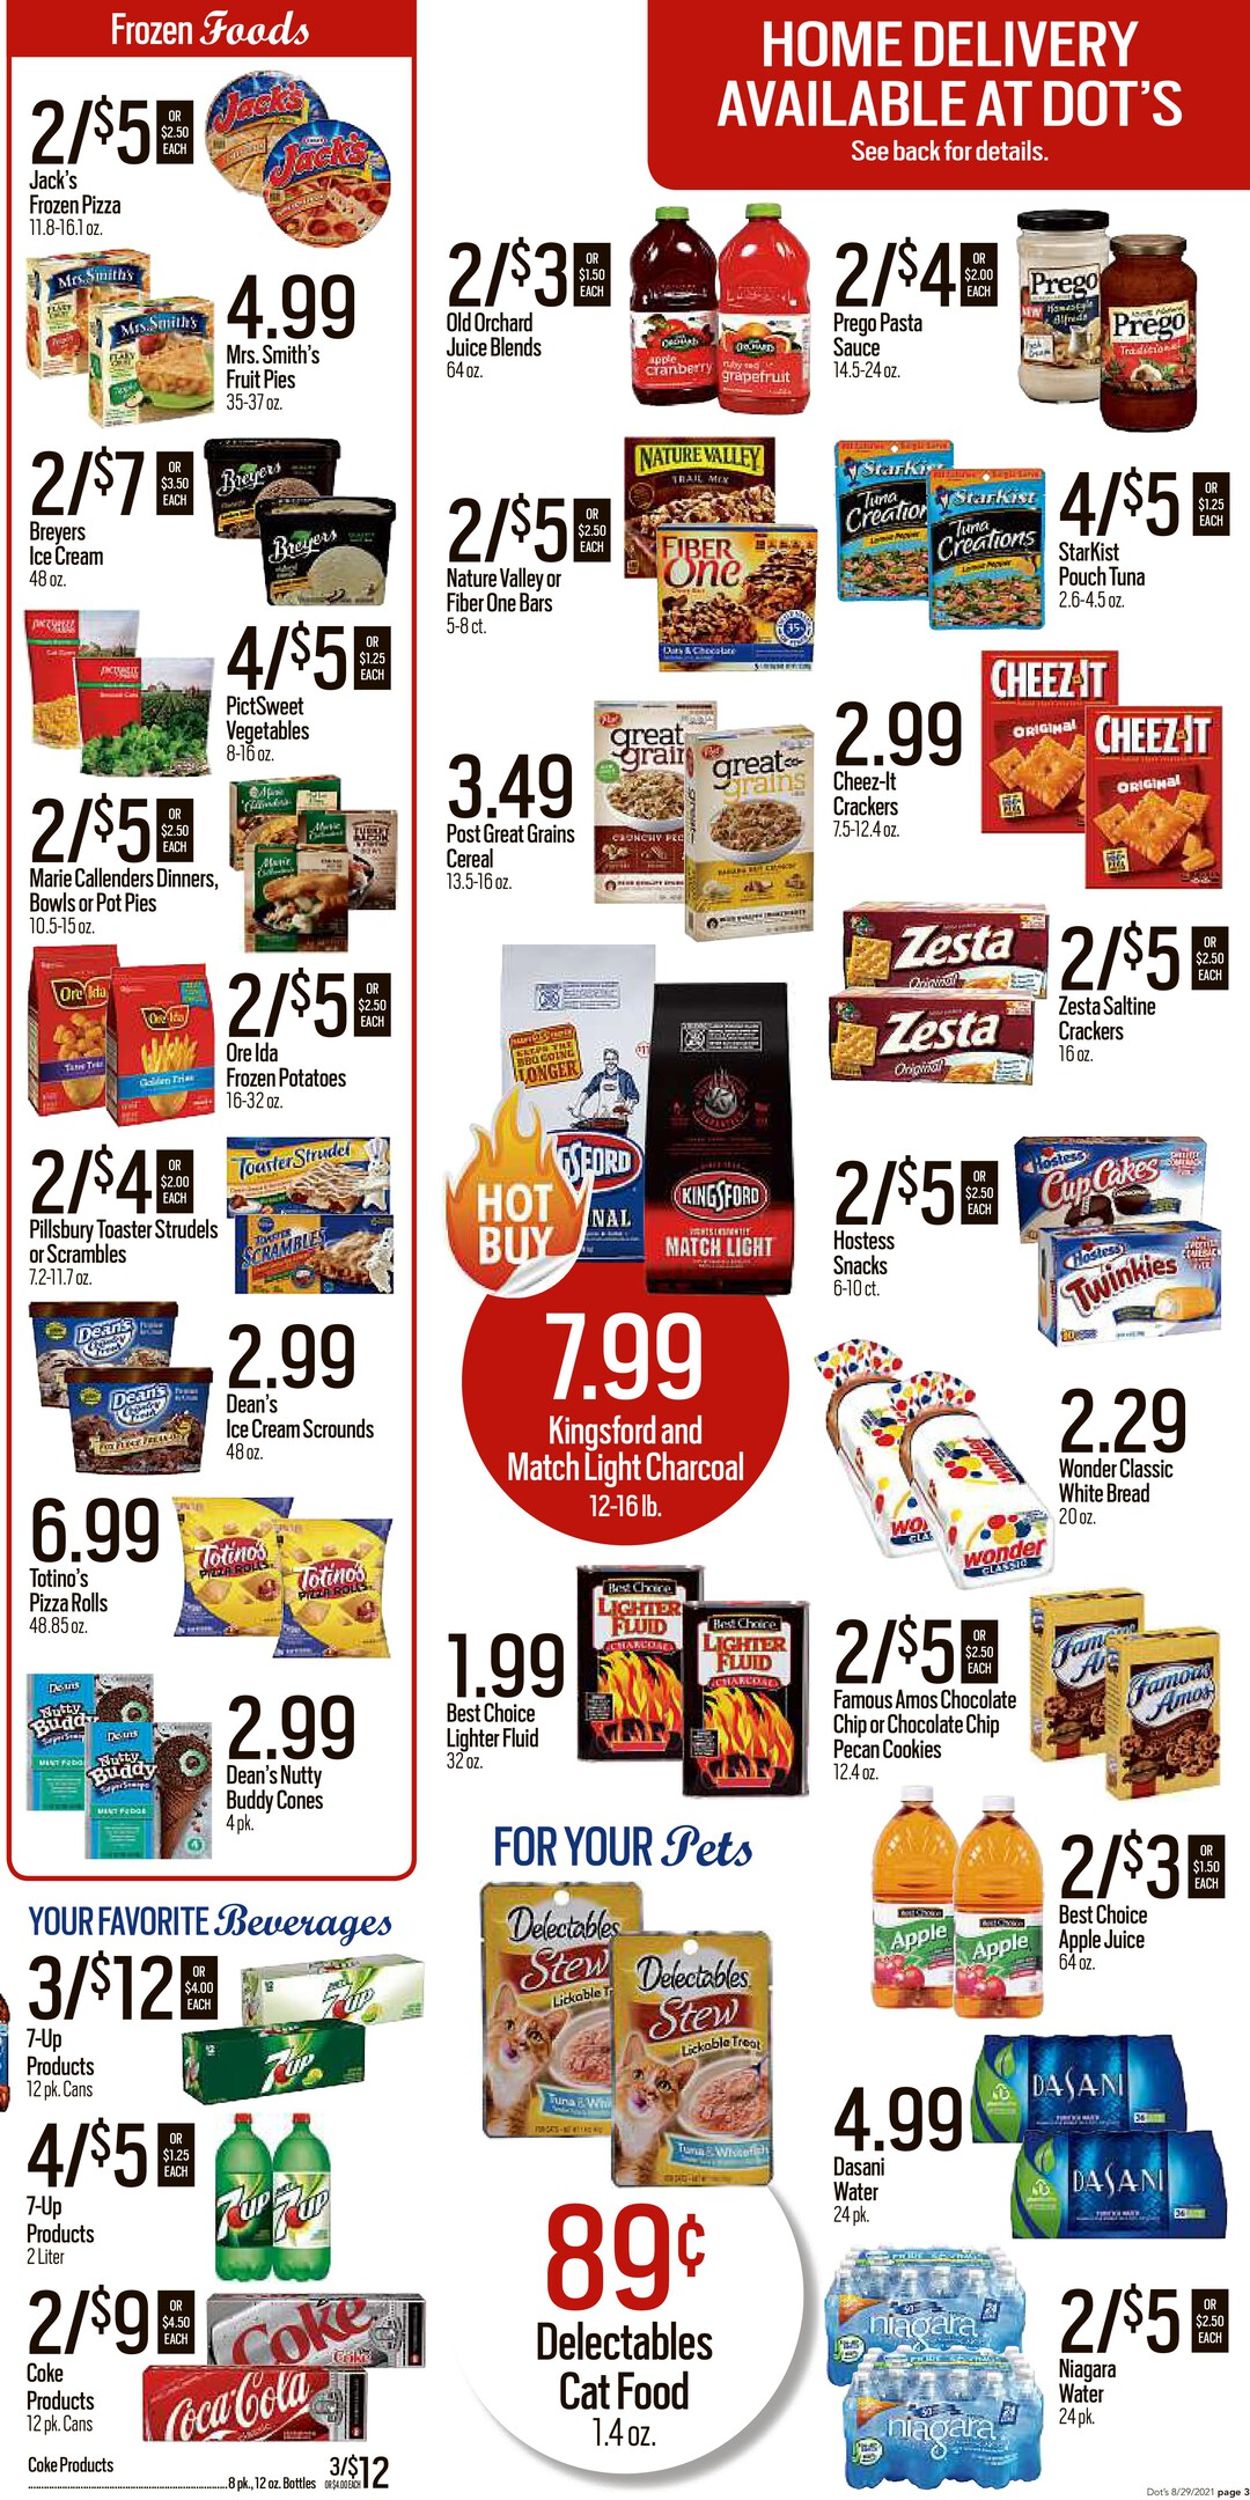 Dot's Market Ad from 08/30/2021